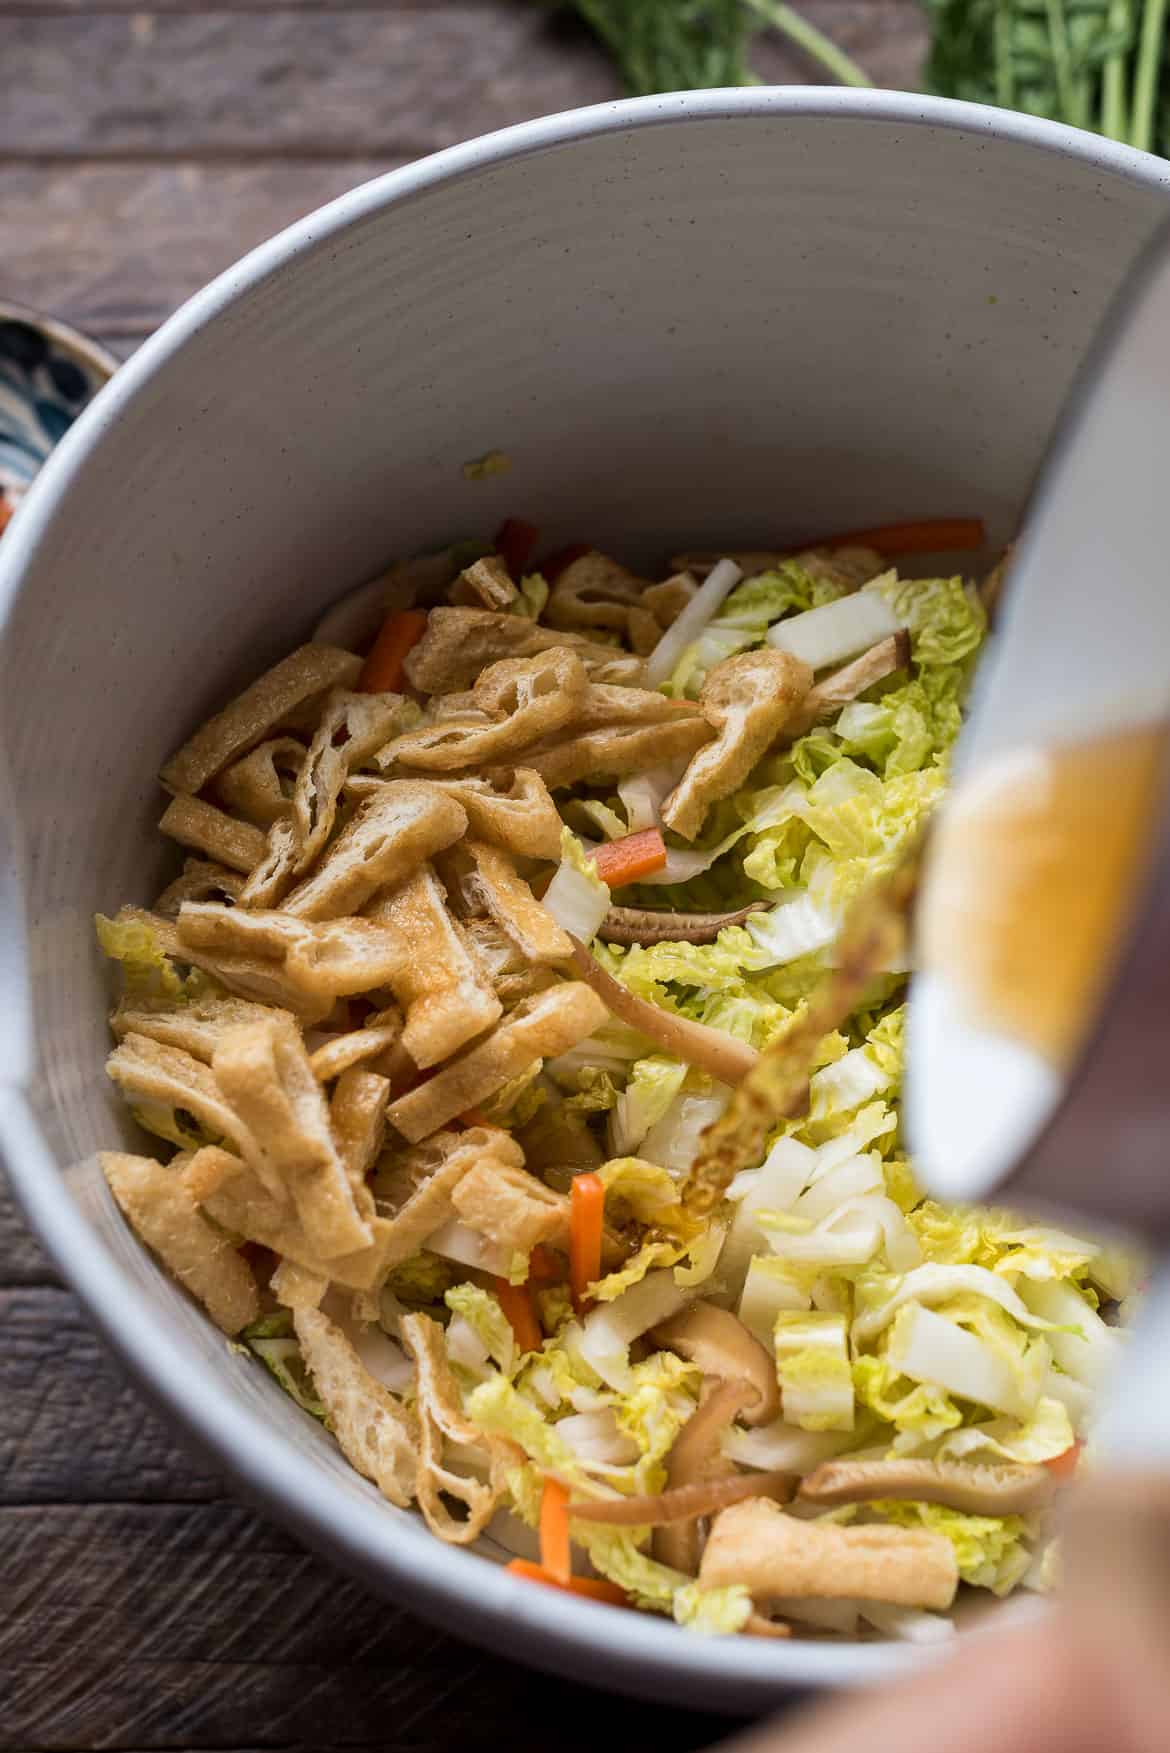 Adding vinegar mixture to Napa cabbage in a bowl.